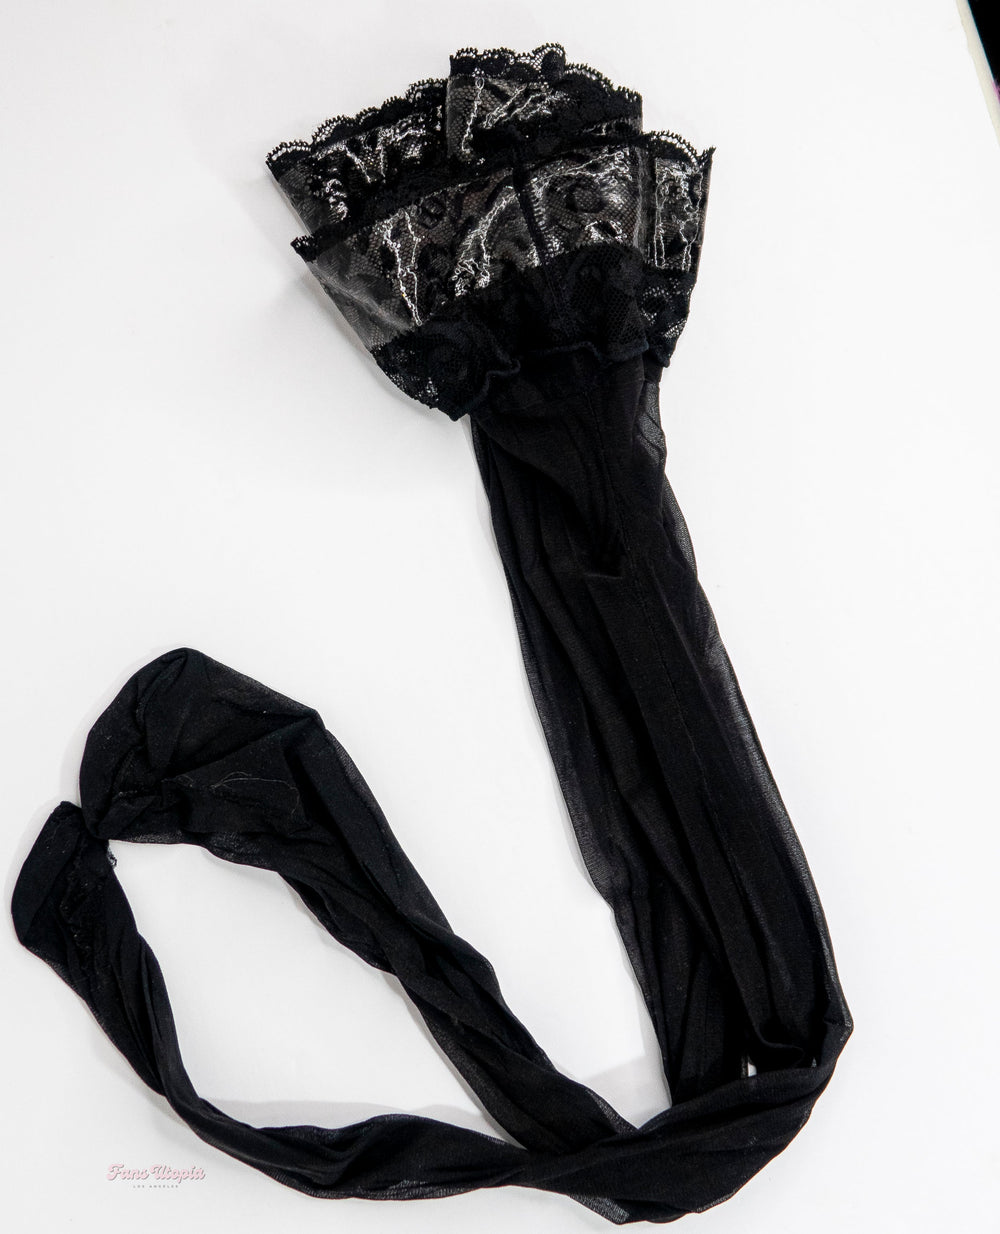 Melissa Stratton HB Black Lace Thigh High Stockings - FANS UTOPIA